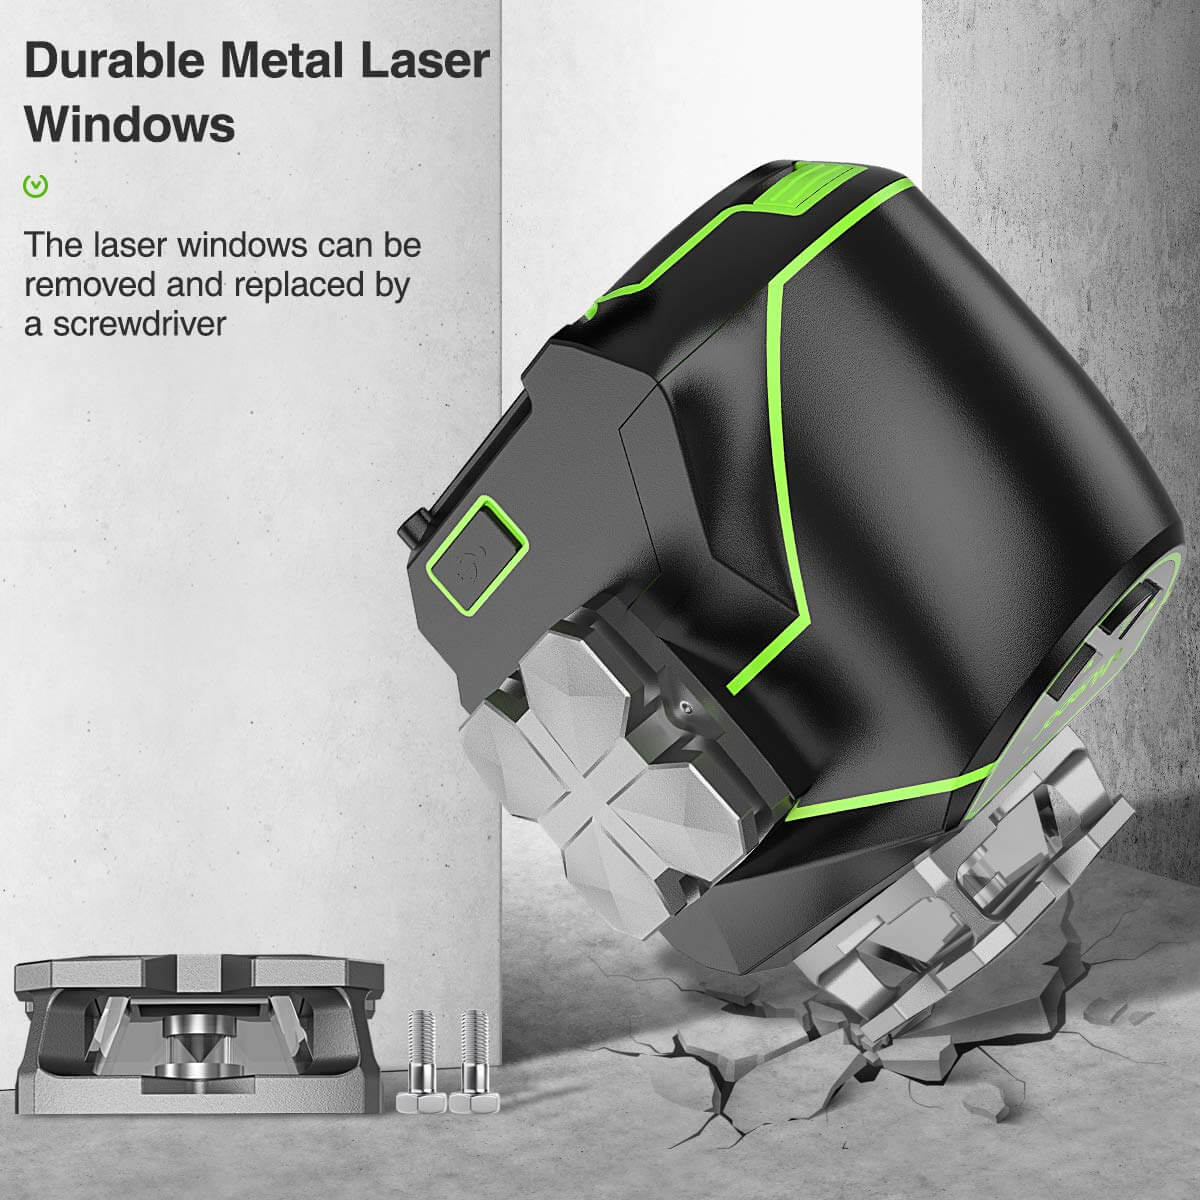 Huepar S02CG 2x360 self-leveling cross line laser with Bluetooth connectivity and metal laser window8